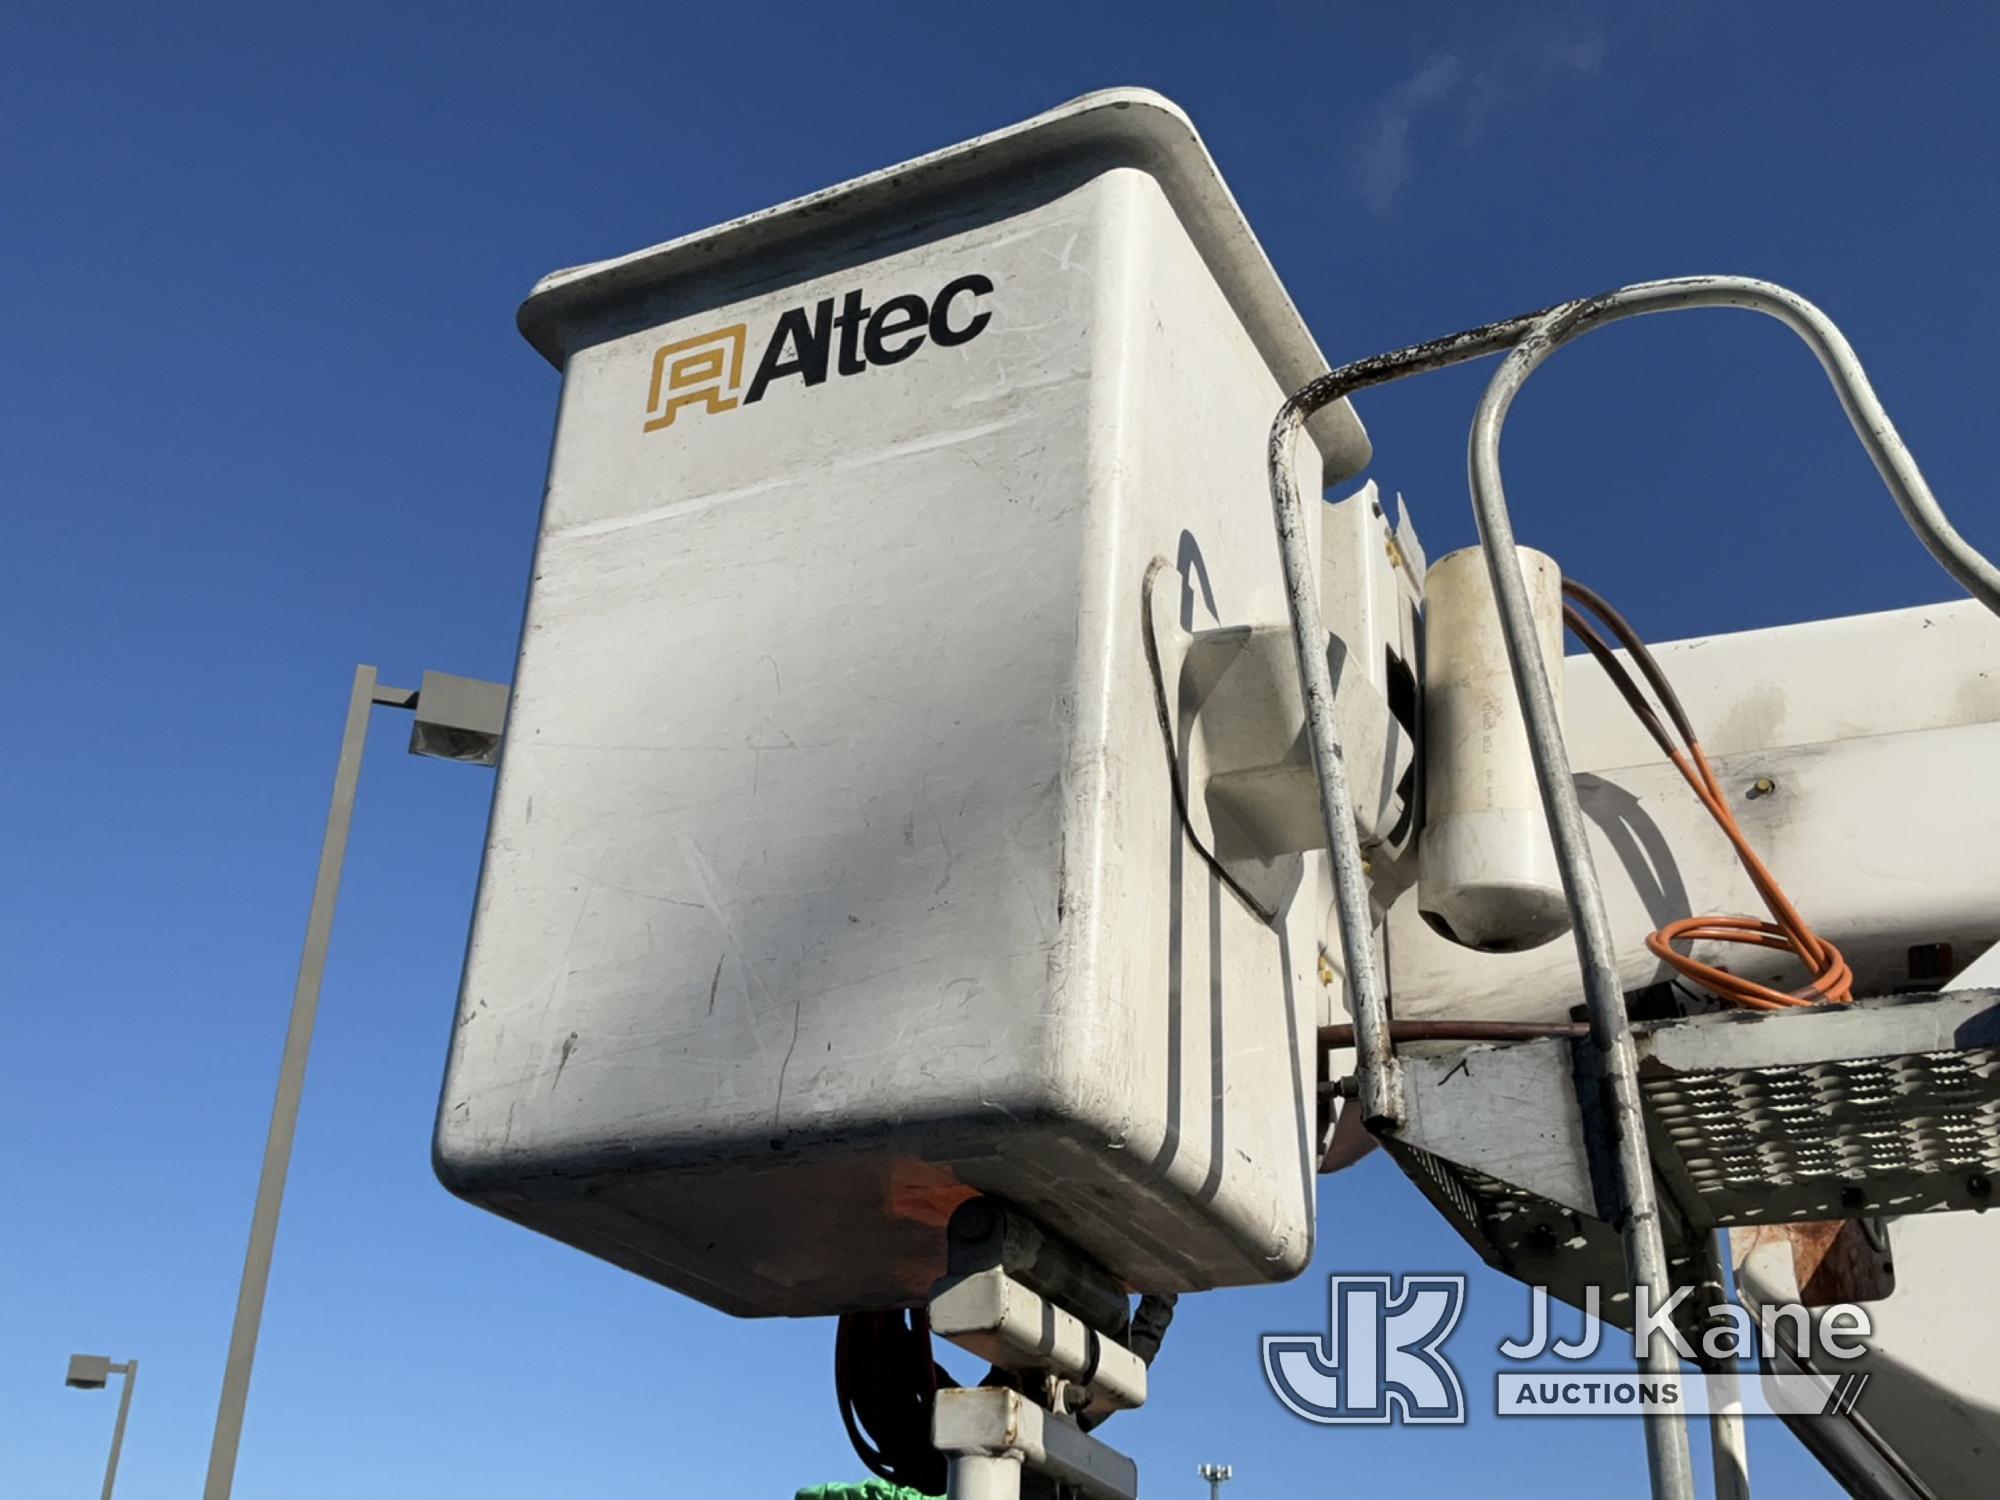 (Chester Springs, PA) Altec A55-OC, Material Handling Bucket Truck mounted on 2008 Freightliner M2 1